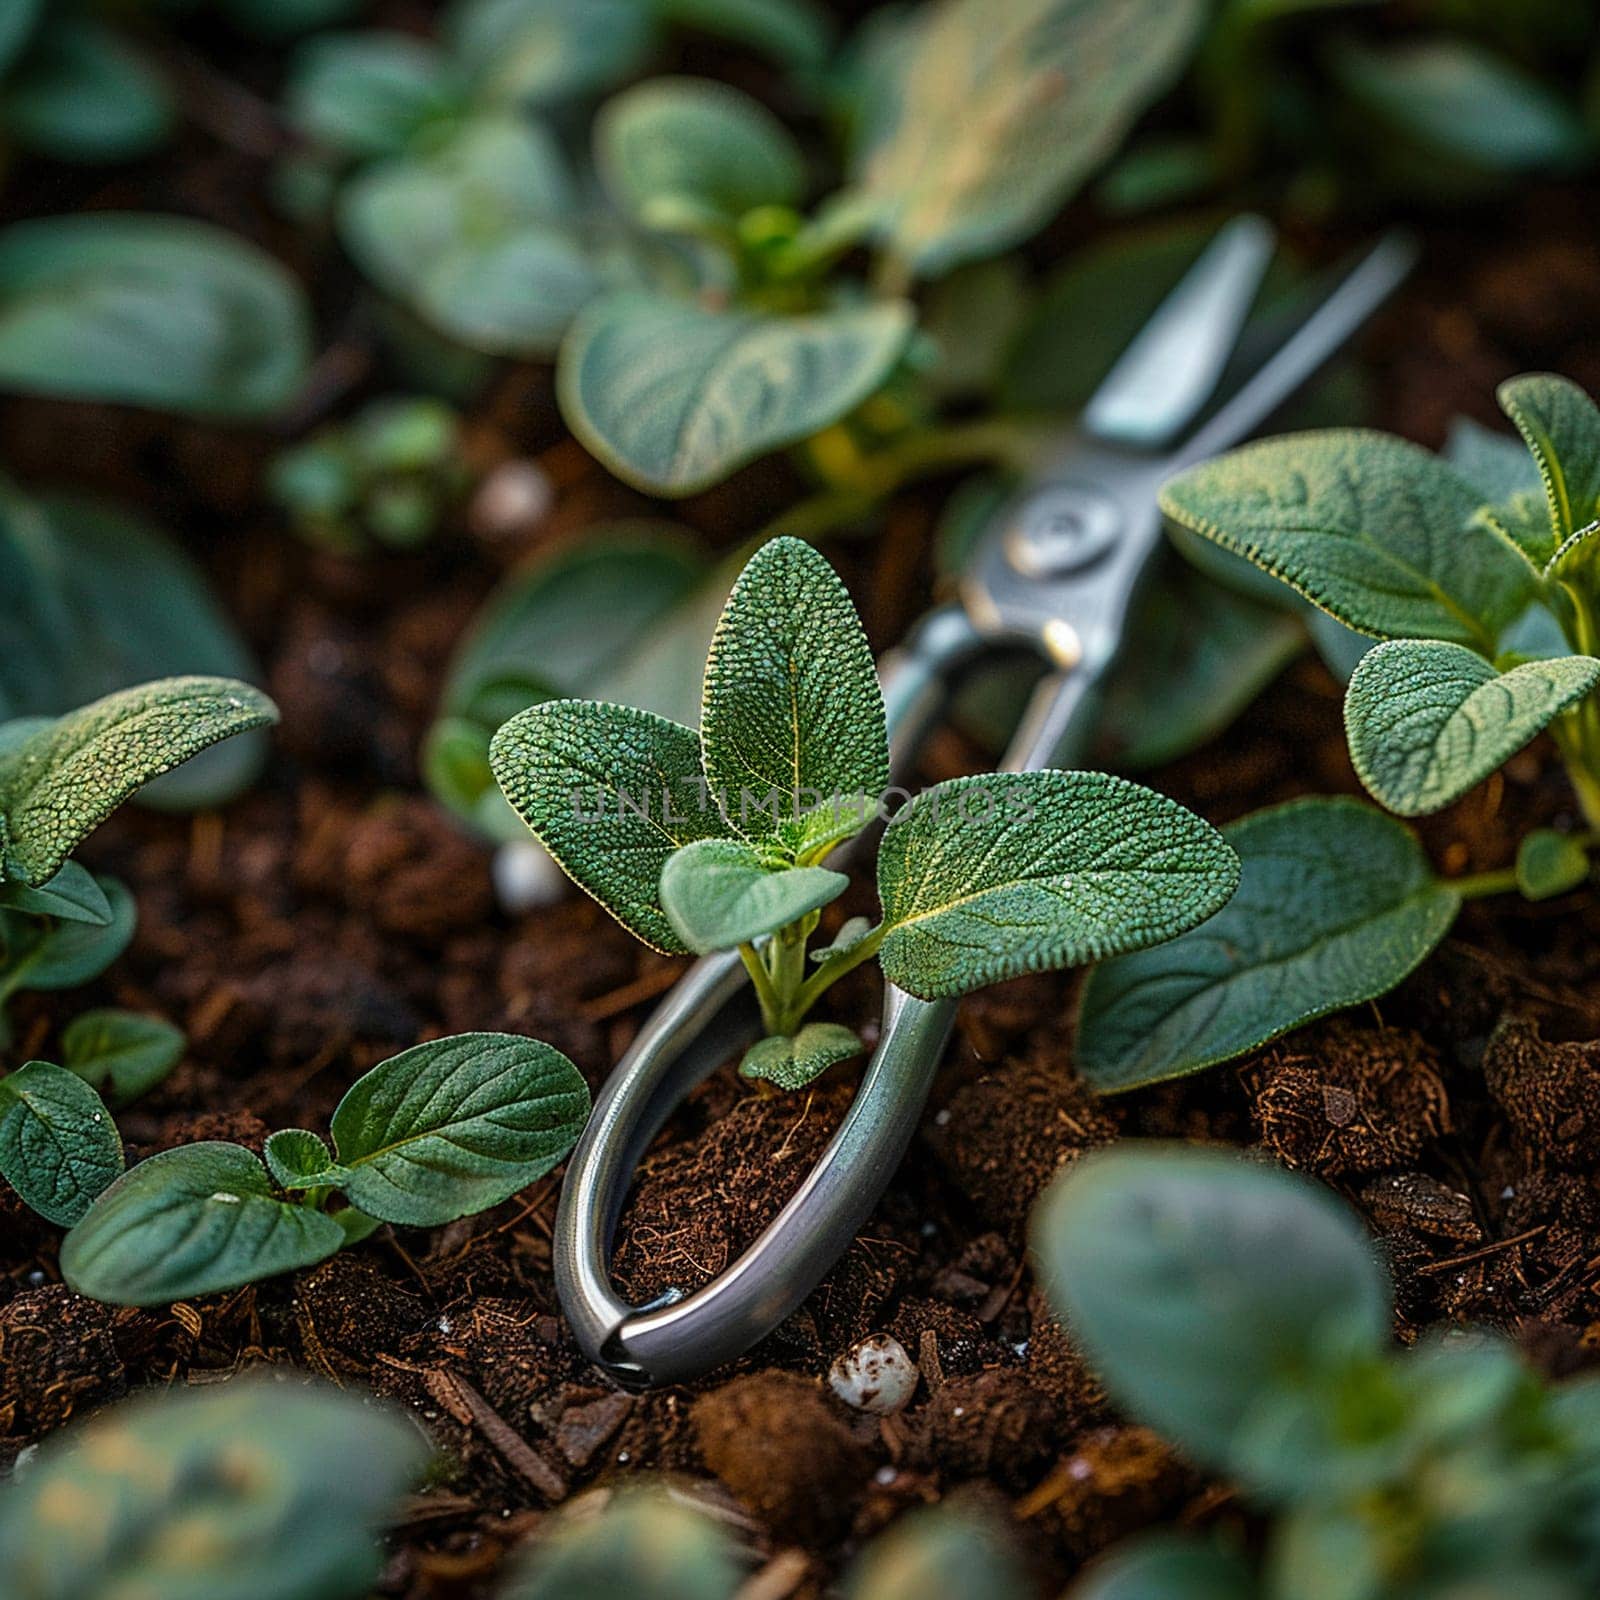 Herb Garden Cultivates Flavorful Growth in Business of Gourmet Gardening, Herb scissors and plant labels cultivate a story of flavorful growth and gourmet gardening in the herb garden business.